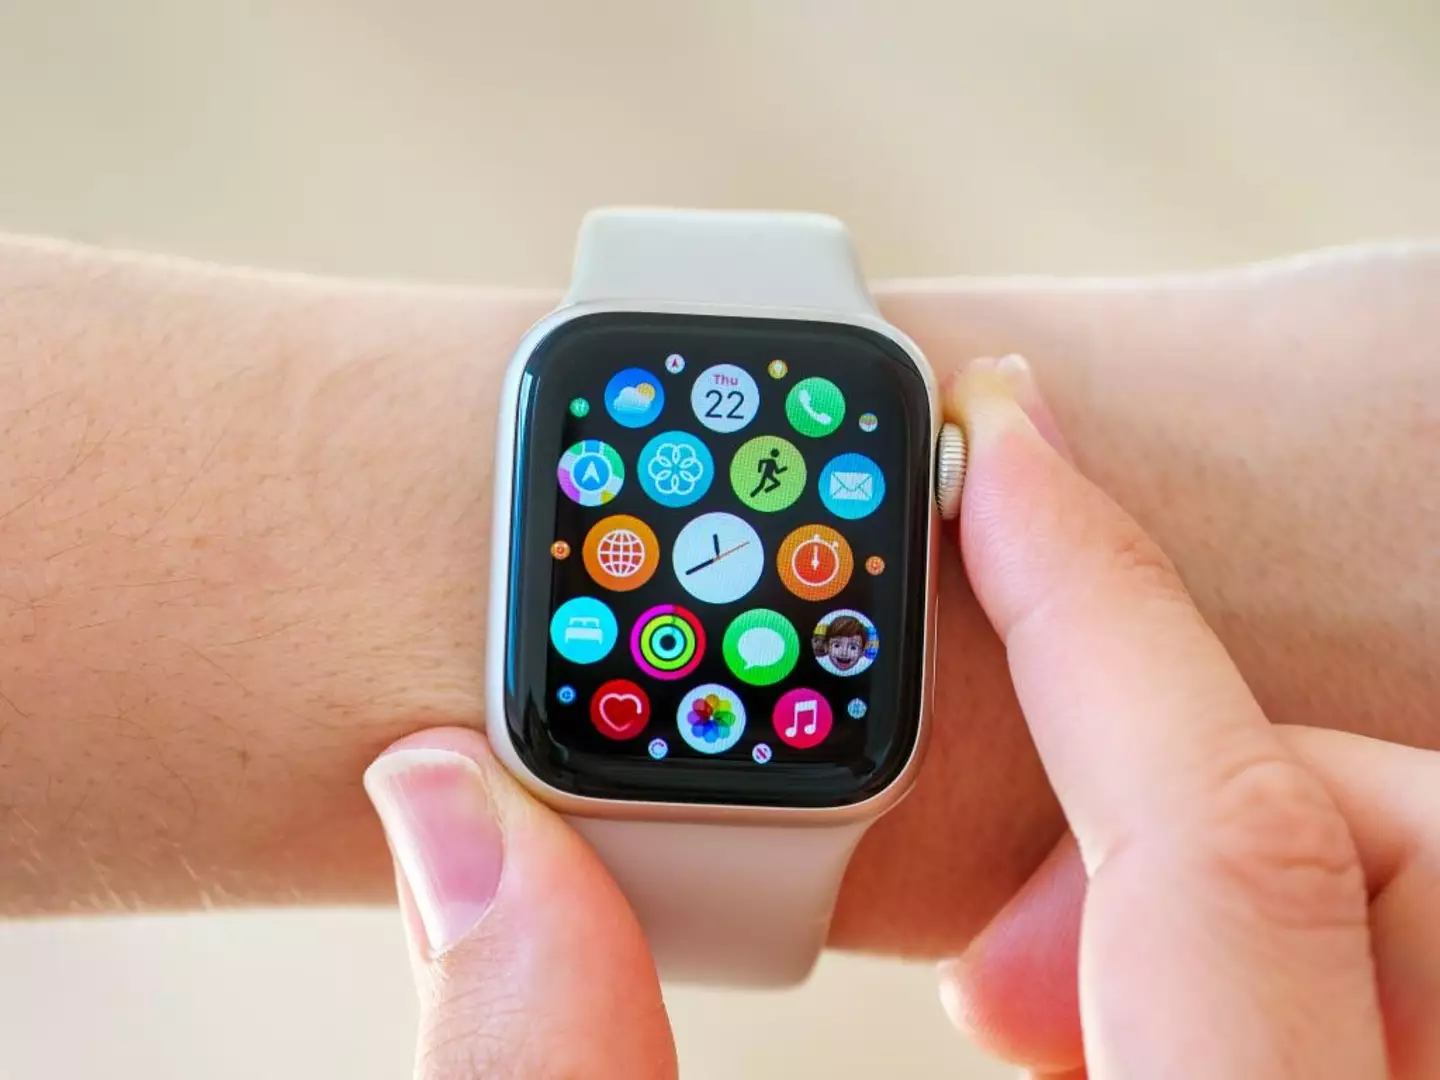 Apple Watch users are excited about the new announcements (Alex Segre/UCG/Universal Images Group via Getty Images)